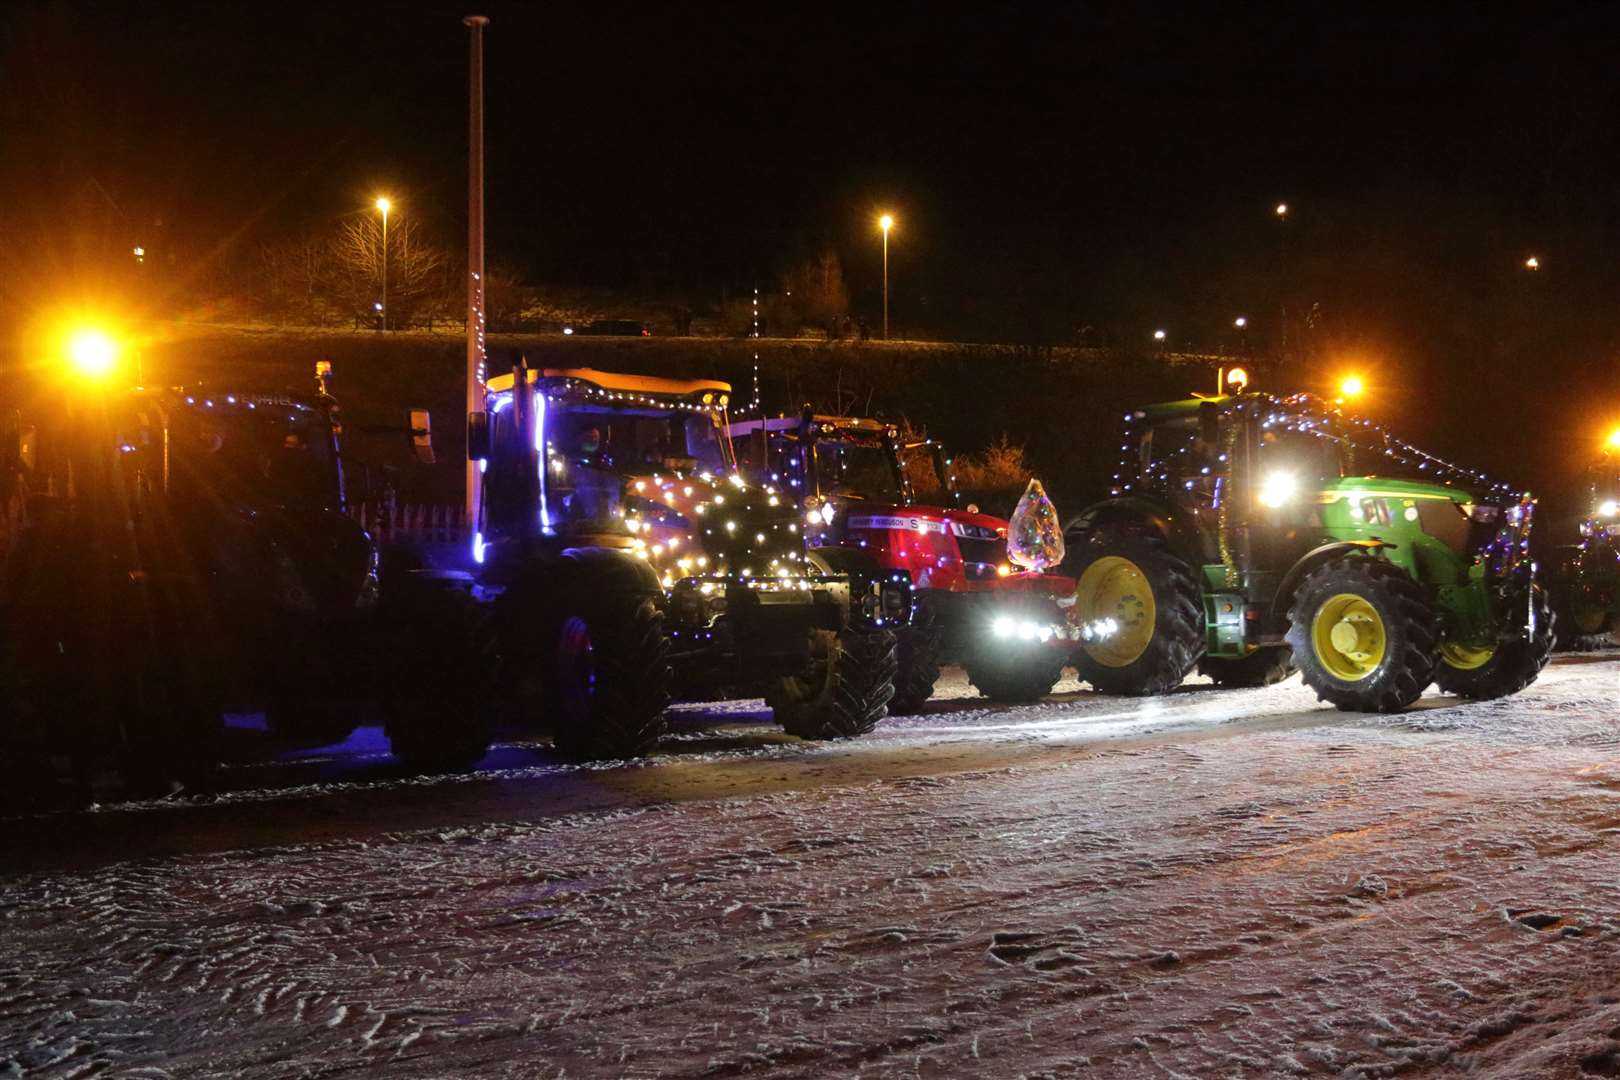 East Aberdeenshire Young Farmers Tractor Run